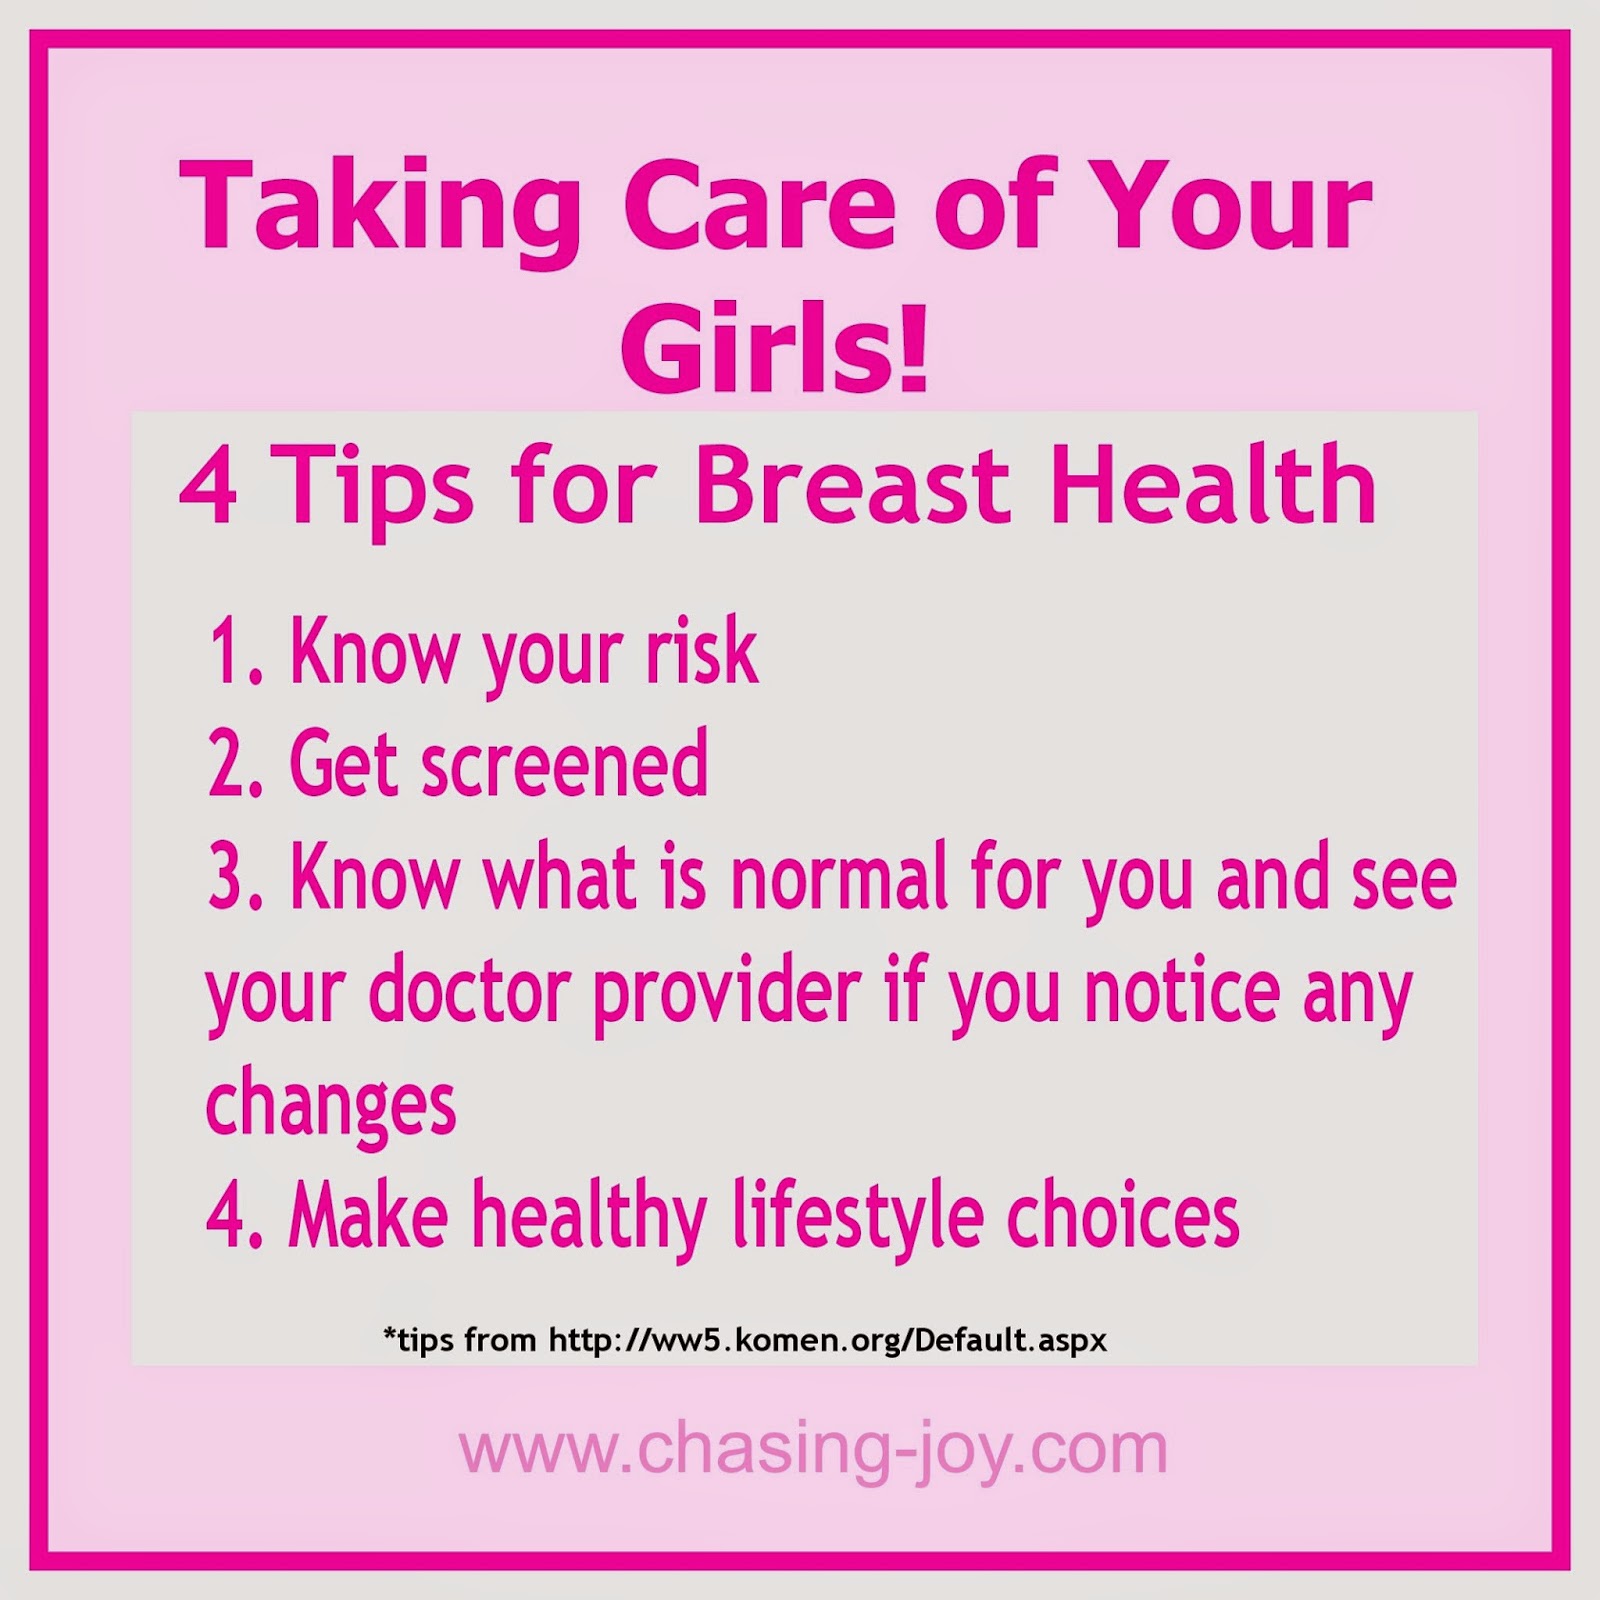 breast health tips from from the susan g komen site